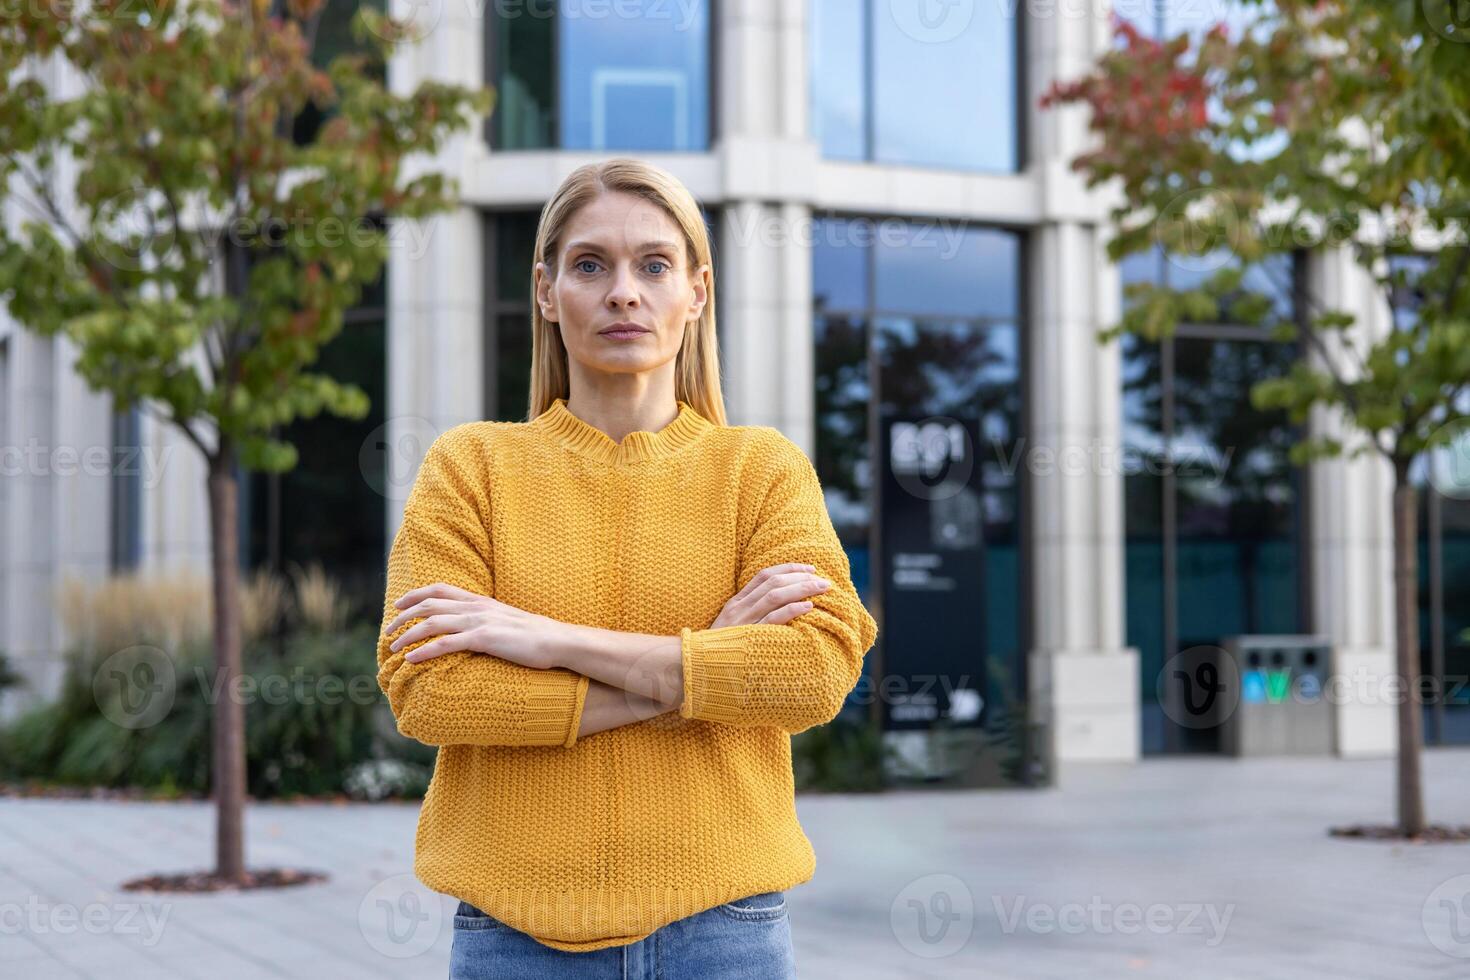 A thoughtful woman with folded arms wearing a vibrant yellow sweater stands confidently in an urban outdoor setting, conveying professionalism and determination. photo